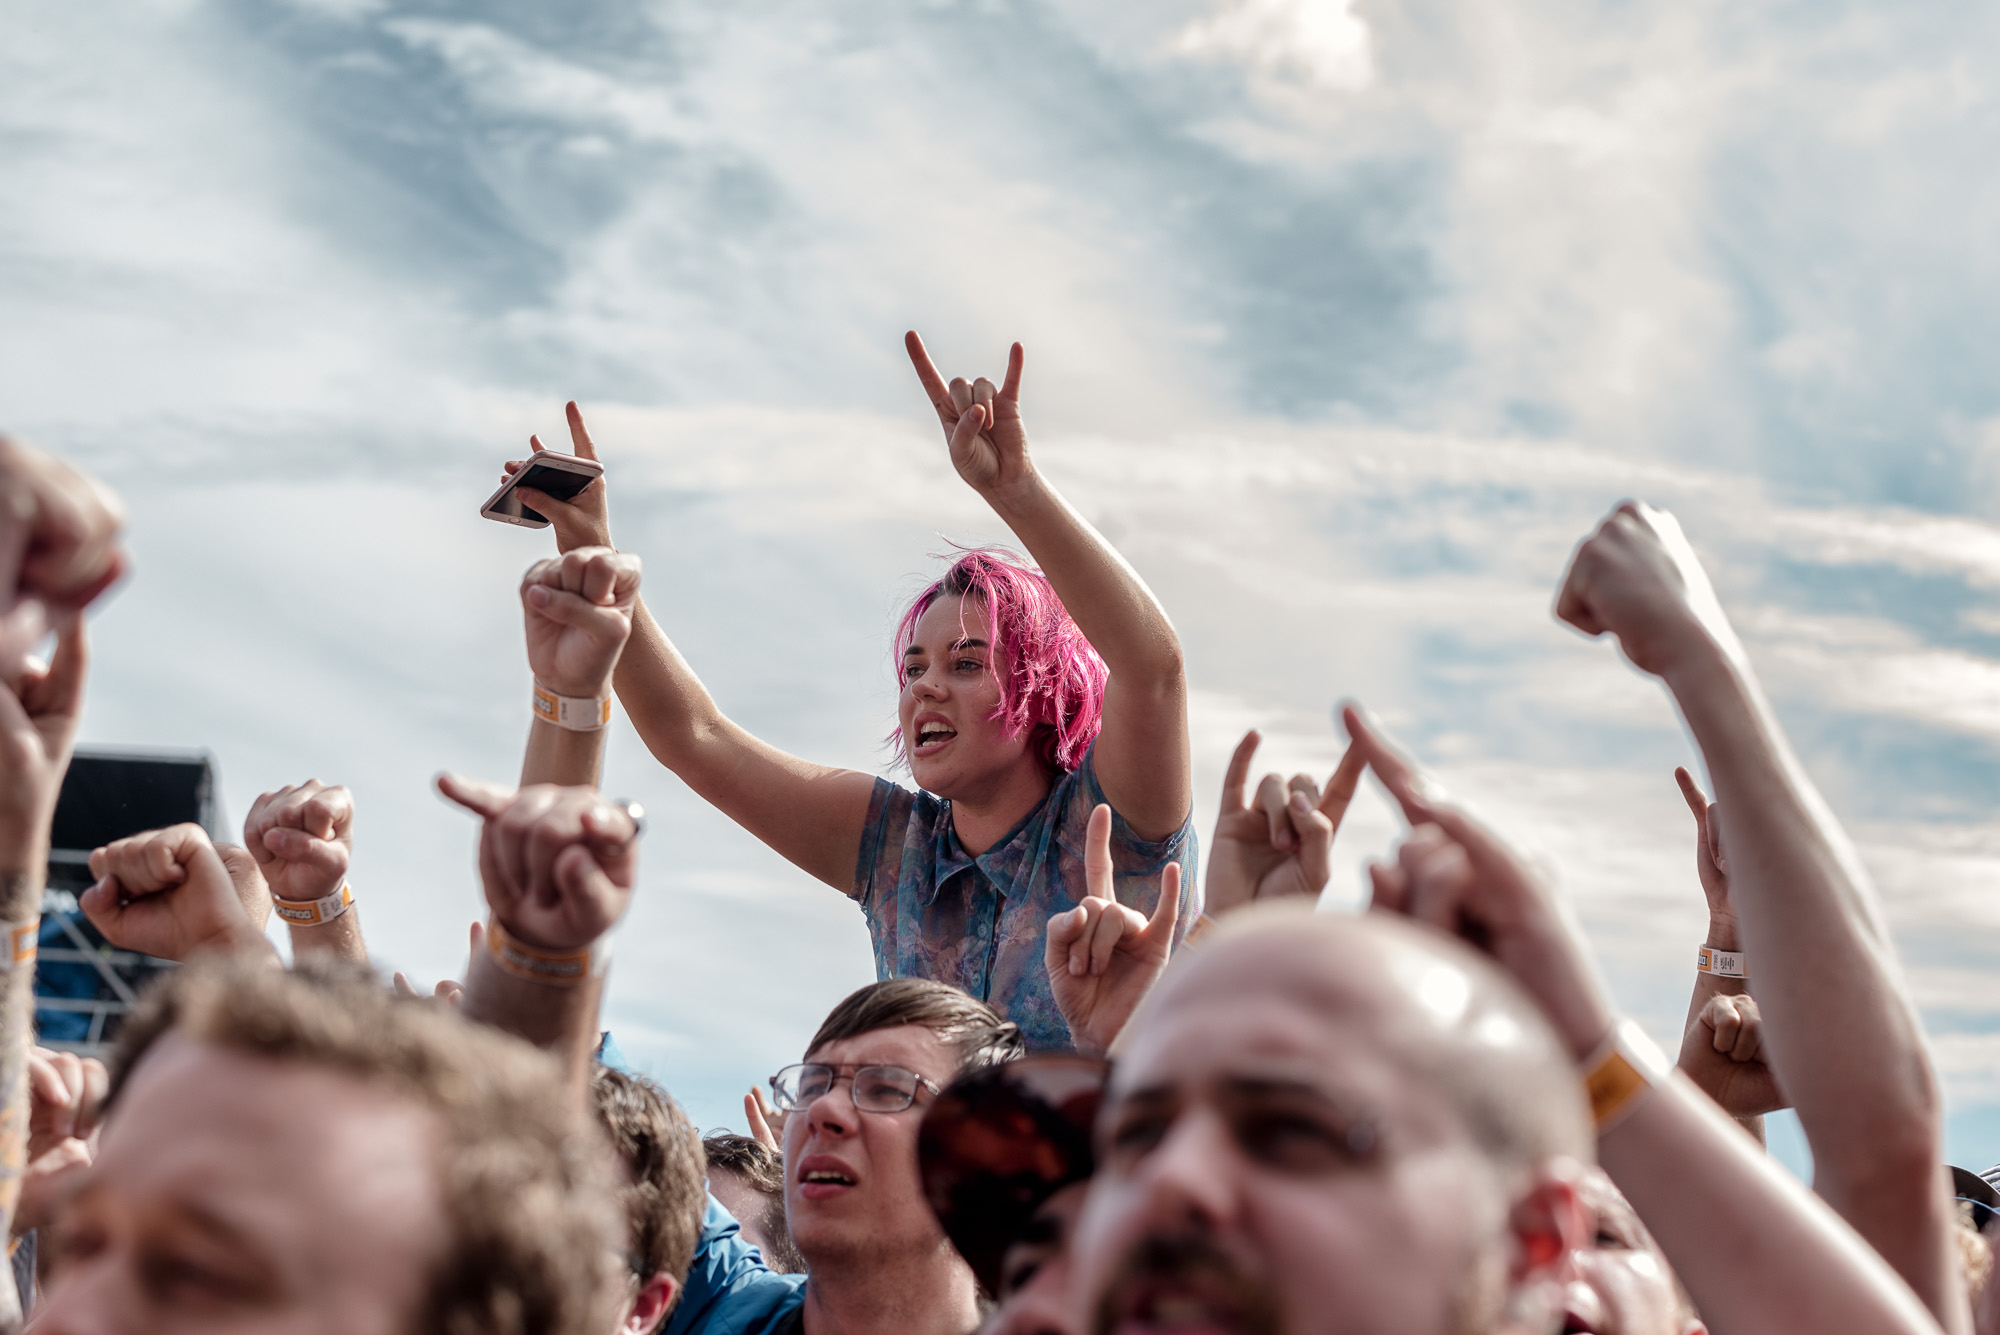 Download Festival Melbourne 2018 - Paul Tadday Photography - 0117.jpg